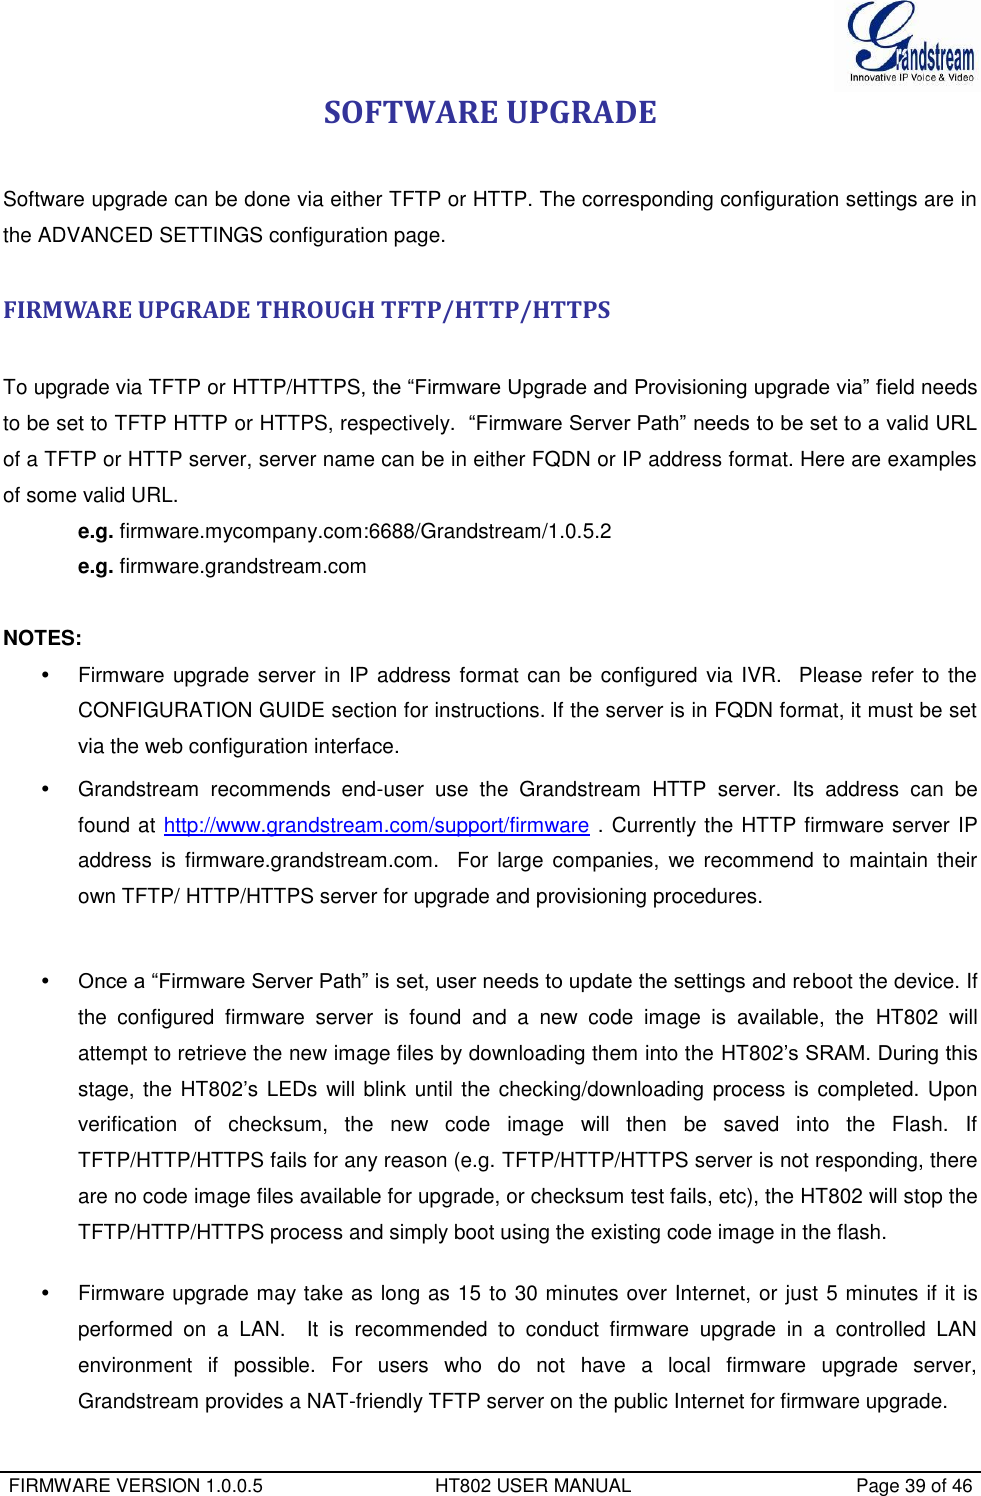  FIRMWARE VERSION 1.0.0.5                                 HT802 USER MANUAL                                           Page 39 of 46  SOFTWARE UPGRADE  Software upgrade can be done via either TFTP or HTTP. The corresponding configuration settings are in the ADVANCED SETTINGS configuration page.   FIRMWARE UPGRADE THROUGH TFTP/HTTP/HTTPS  To upgrade via TFTP or HTTP/HTTPS, the “Firmware Upgrade and Provisioning upgrade via” field needs to be set to TFTP HTTP or HTTPS, respectively.  “Firmware Server Path” needs to be set to a valid URL of a TFTP or HTTP server, server name can be in either FQDN or IP address format. Here are examples of some valid URL.  e.g. firmware.mycompany.com:6688/Grandstream/1.0.5.2 e.g. firmware.grandstream.com   NOTES:   Firmware upgrade server in IP address format can be configured via IVR.  Please refer to the CONFIGURATION GUIDE section for instructions. If the server is in FQDN format, it must be set via the web configuration interface.   Grandstream  recommends  end-user  use  the  Grandstream  HTTP  server.  Its  address  can  be found at http://www.grandstream.com/support/firmware . Currently the HTTP firmware server IP address  is  firmware.grandstream.com.    For  large companies,  we recommend  to  maintain their own TFTP/ HTTP/HTTPS server for upgrade and provisioning procedures.   Once a “Firmware Server Path” is set, user needs to update the settings and reboot the device. If the  configured  firmware  server  is  found  and  a  new  code  image  is  available,  the  HT802  will attempt to retrieve the new image files by downloading them into the HT802’s SRAM. During this stage, the HT802’s LEDs  will blink until the checking/downloading process is completed. Upon verification  of  checksum,  the  new  code  image  will  then  be  saved  into  the  Flash.  If TFTP/HTTP/HTTPS fails for any reason (e.g. TFTP/HTTP/HTTPS server is not responding, there are no code image files available for upgrade, or checksum test fails, etc), the HT802 will stop the TFTP/HTTP/HTTPS process and simply boot using the existing code image in the flash.    Firmware upgrade may take as long as 15 to 30 minutes over Internet, or just 5 minutes if it is performed  on  a  LAN.    It  is  recommended  to  conduct  firmware  upgrade  in  a  controlled  LAN environment  if  possible.  For  users  who  do  not  have  a  local  firmware  upgrade  server, Grandstream provides a NAT-friendly TFTP server on the public Internet for firmware upgrade. 